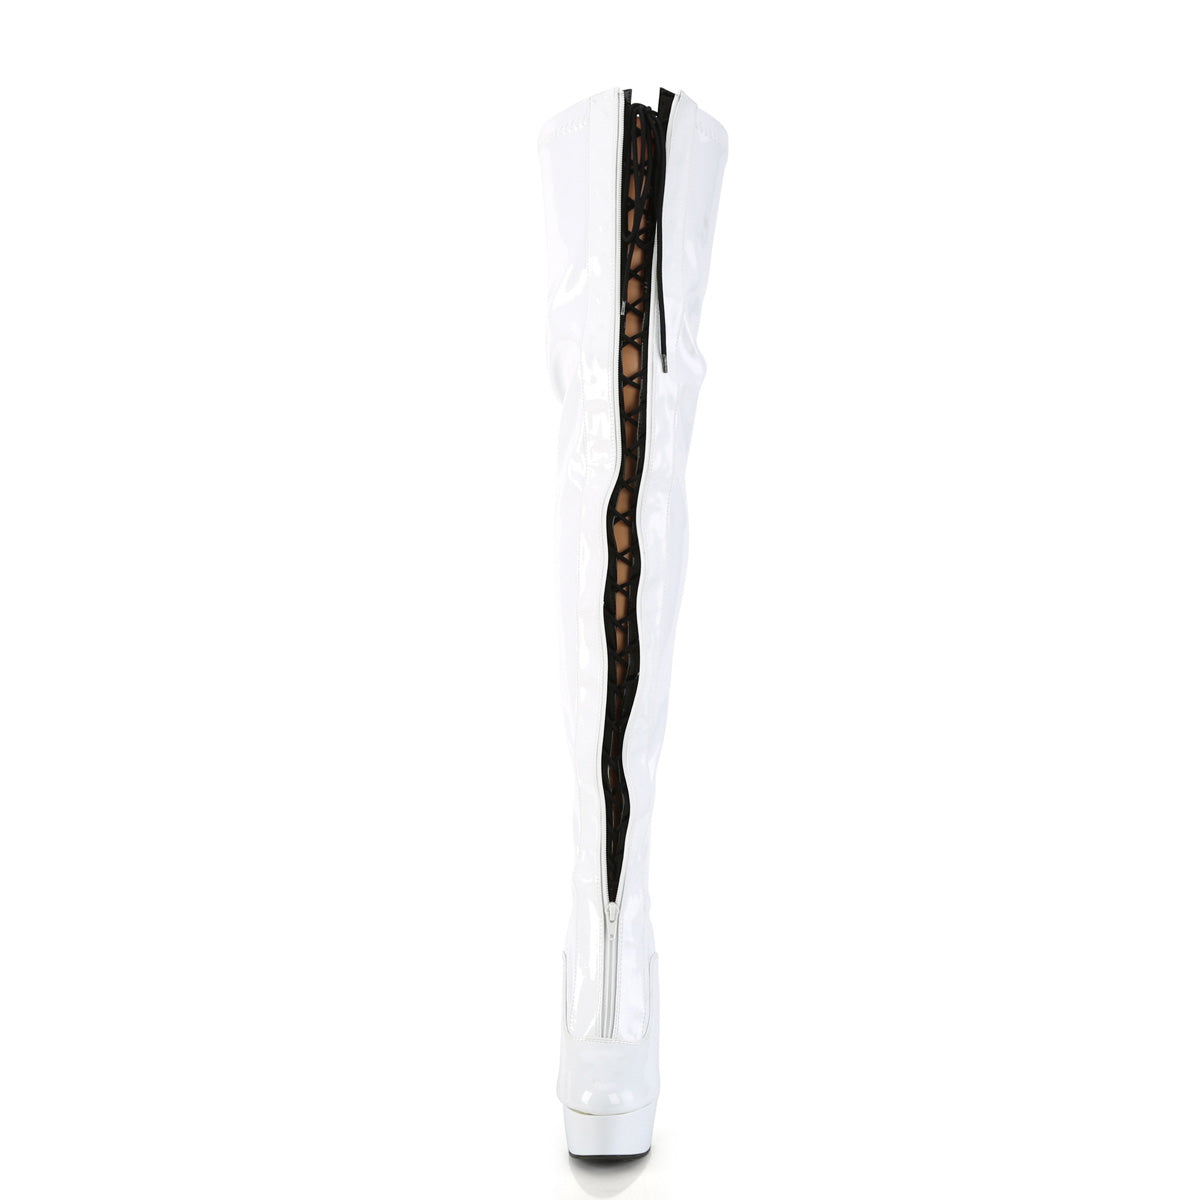 DELIGHT-3027 Pleaser Thigh High Boots Wht-Black Str. Pat/White Platforms (Exotic Dancing)